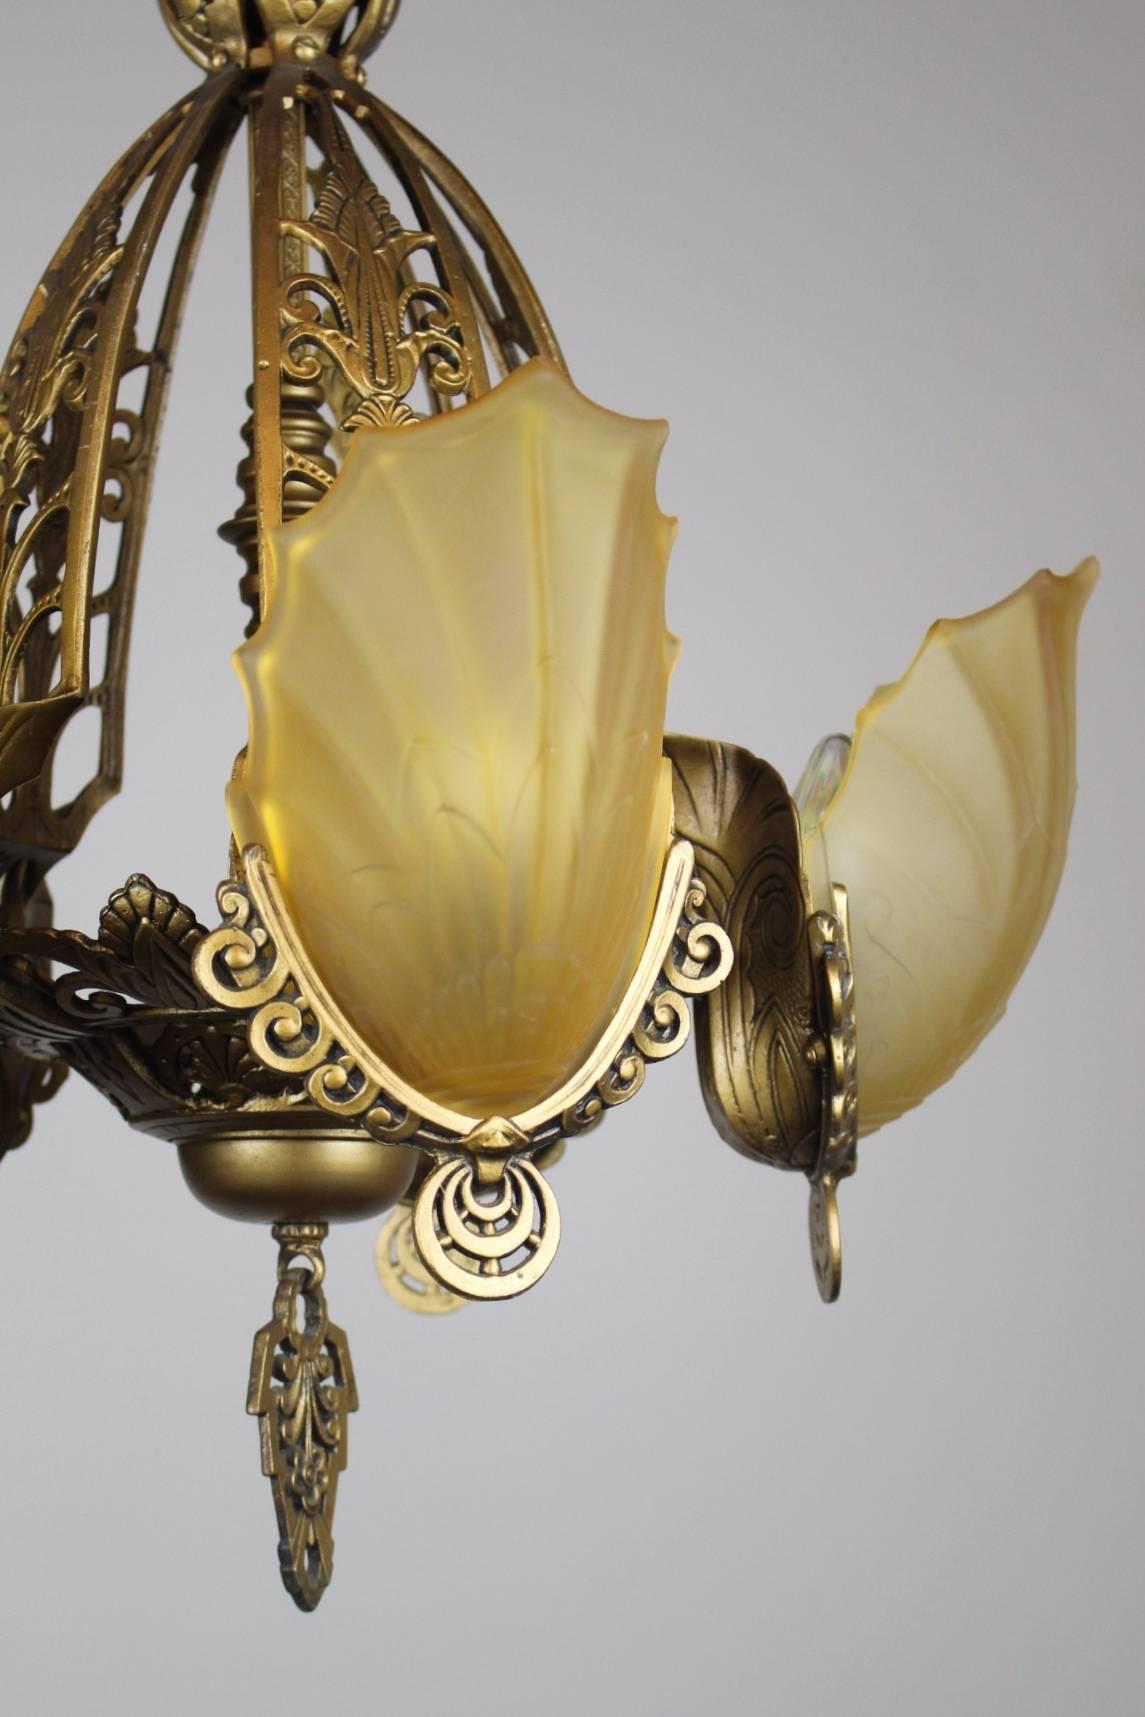 Original Art Deco Slip Shade Fixture Five-Light In Excellent Condition For Sale In Vancouver, BC